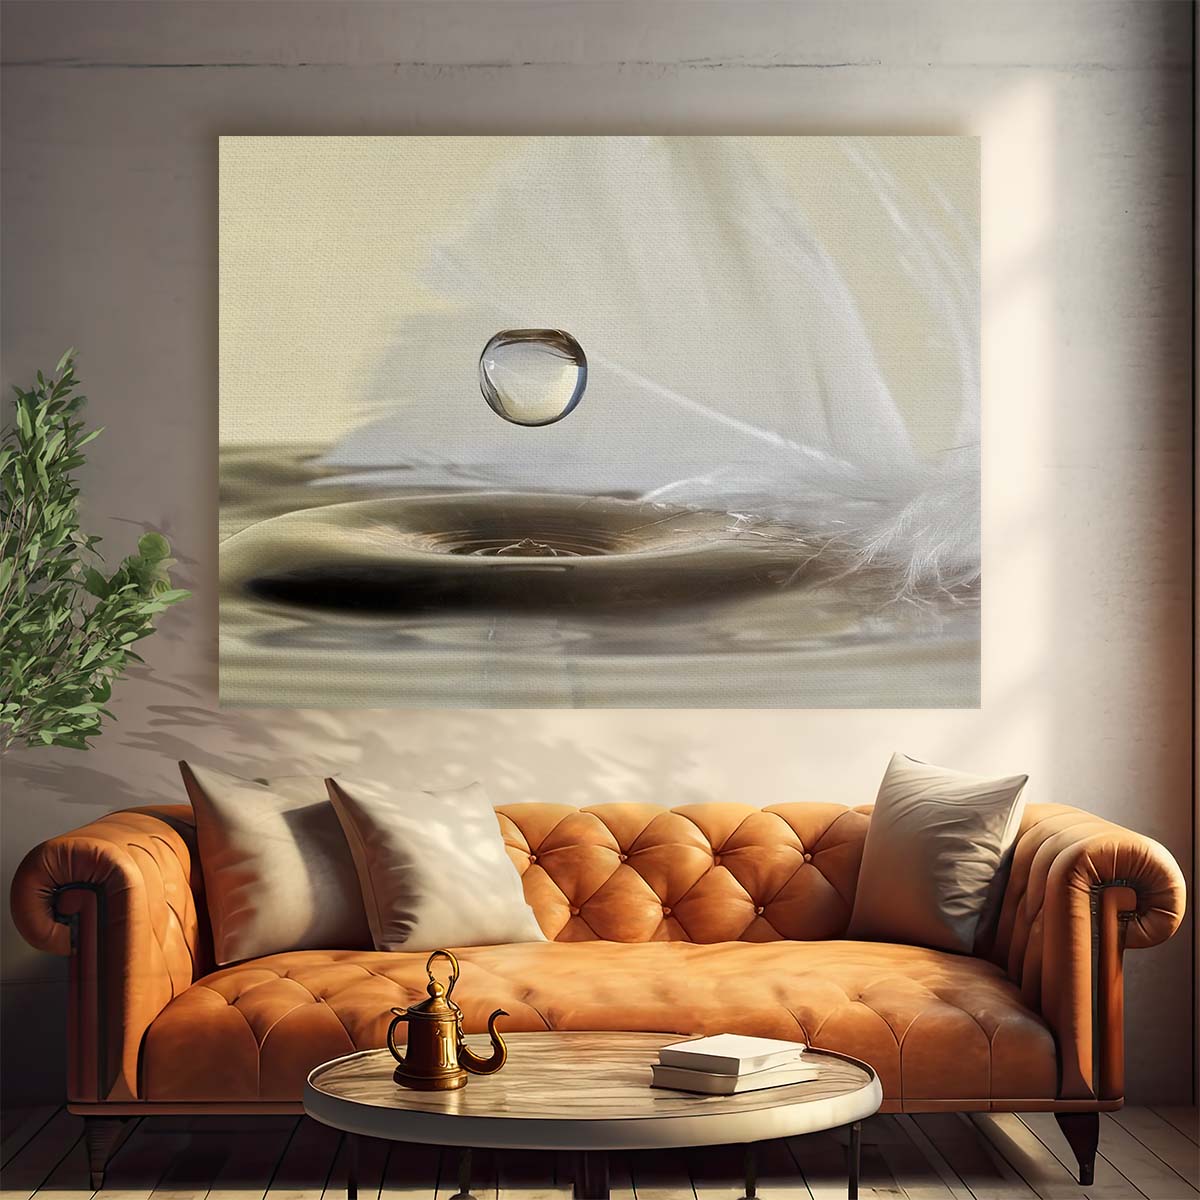 Delicate Feather & Water Droplet Macro Wall Art by Luxuriance Designs. Made in USA.